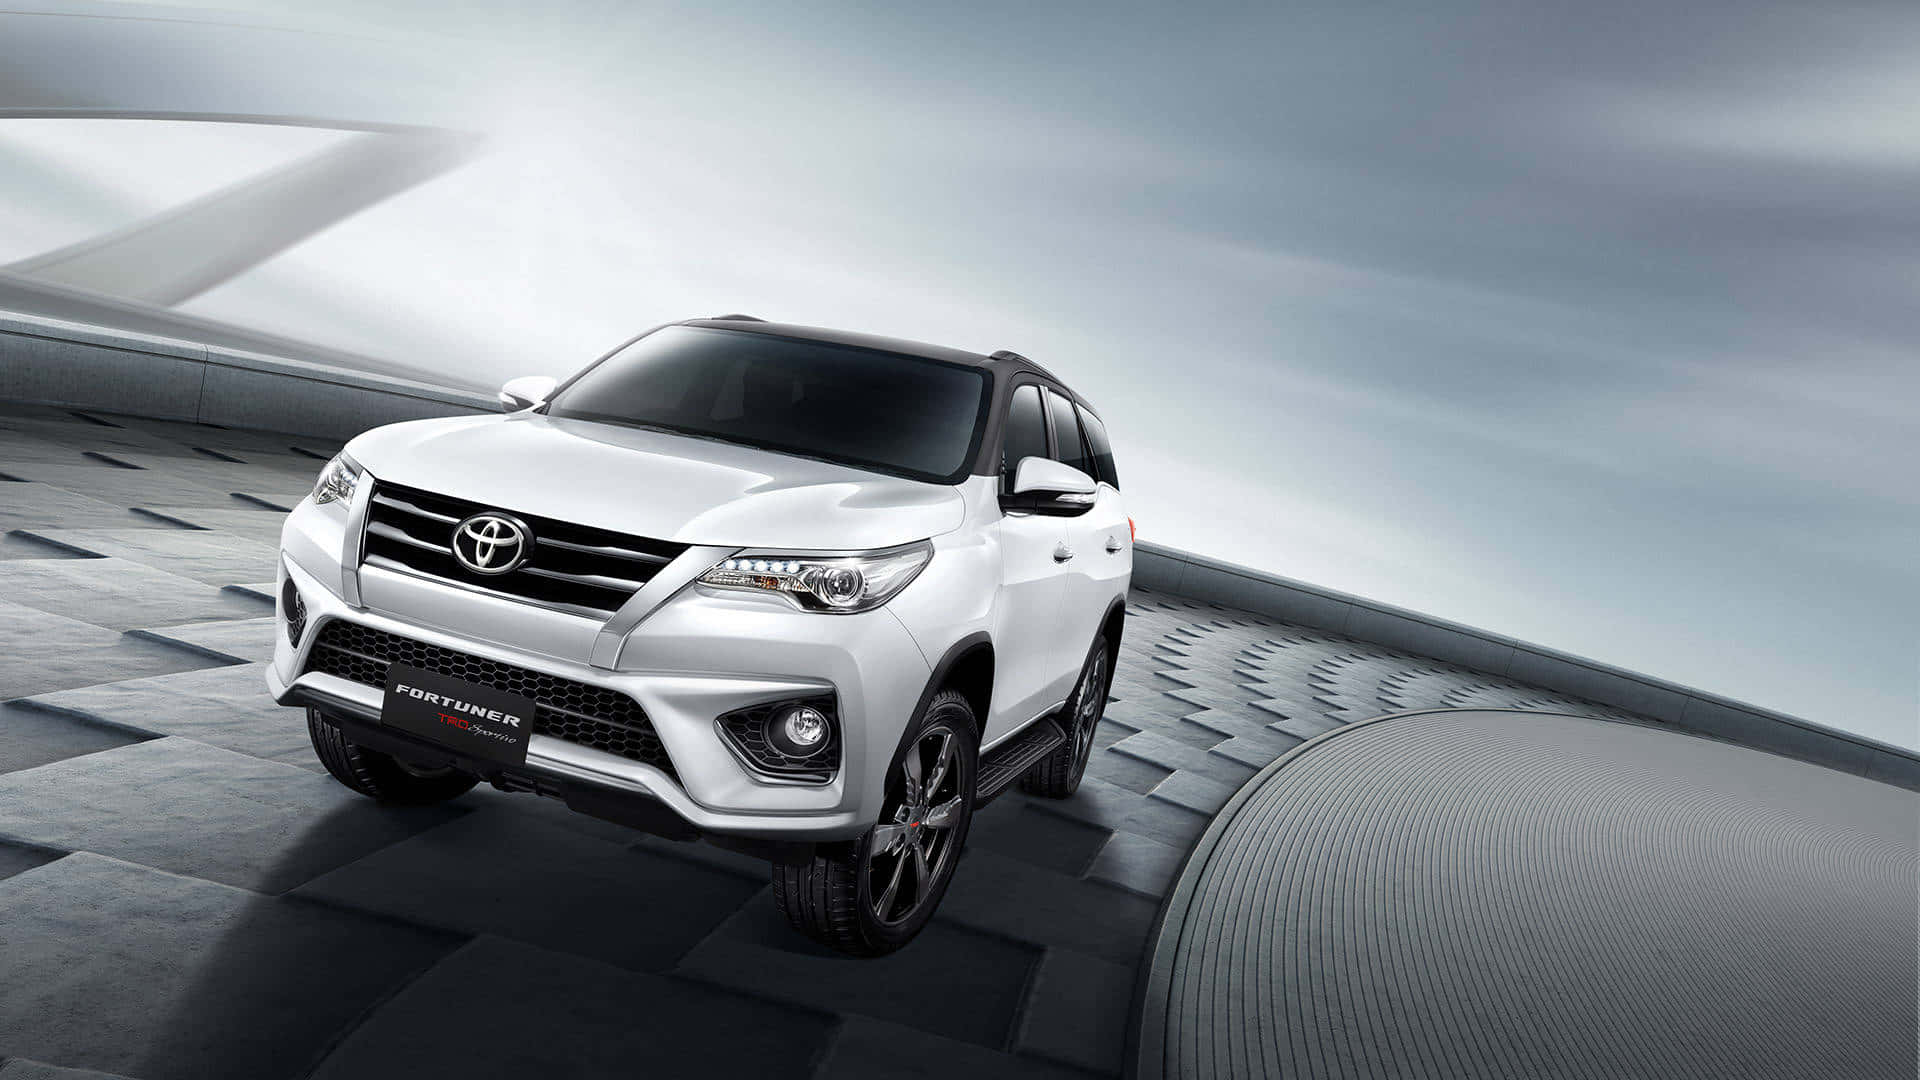 Look sharp and stylish with the Toyota TRD Wallpaper